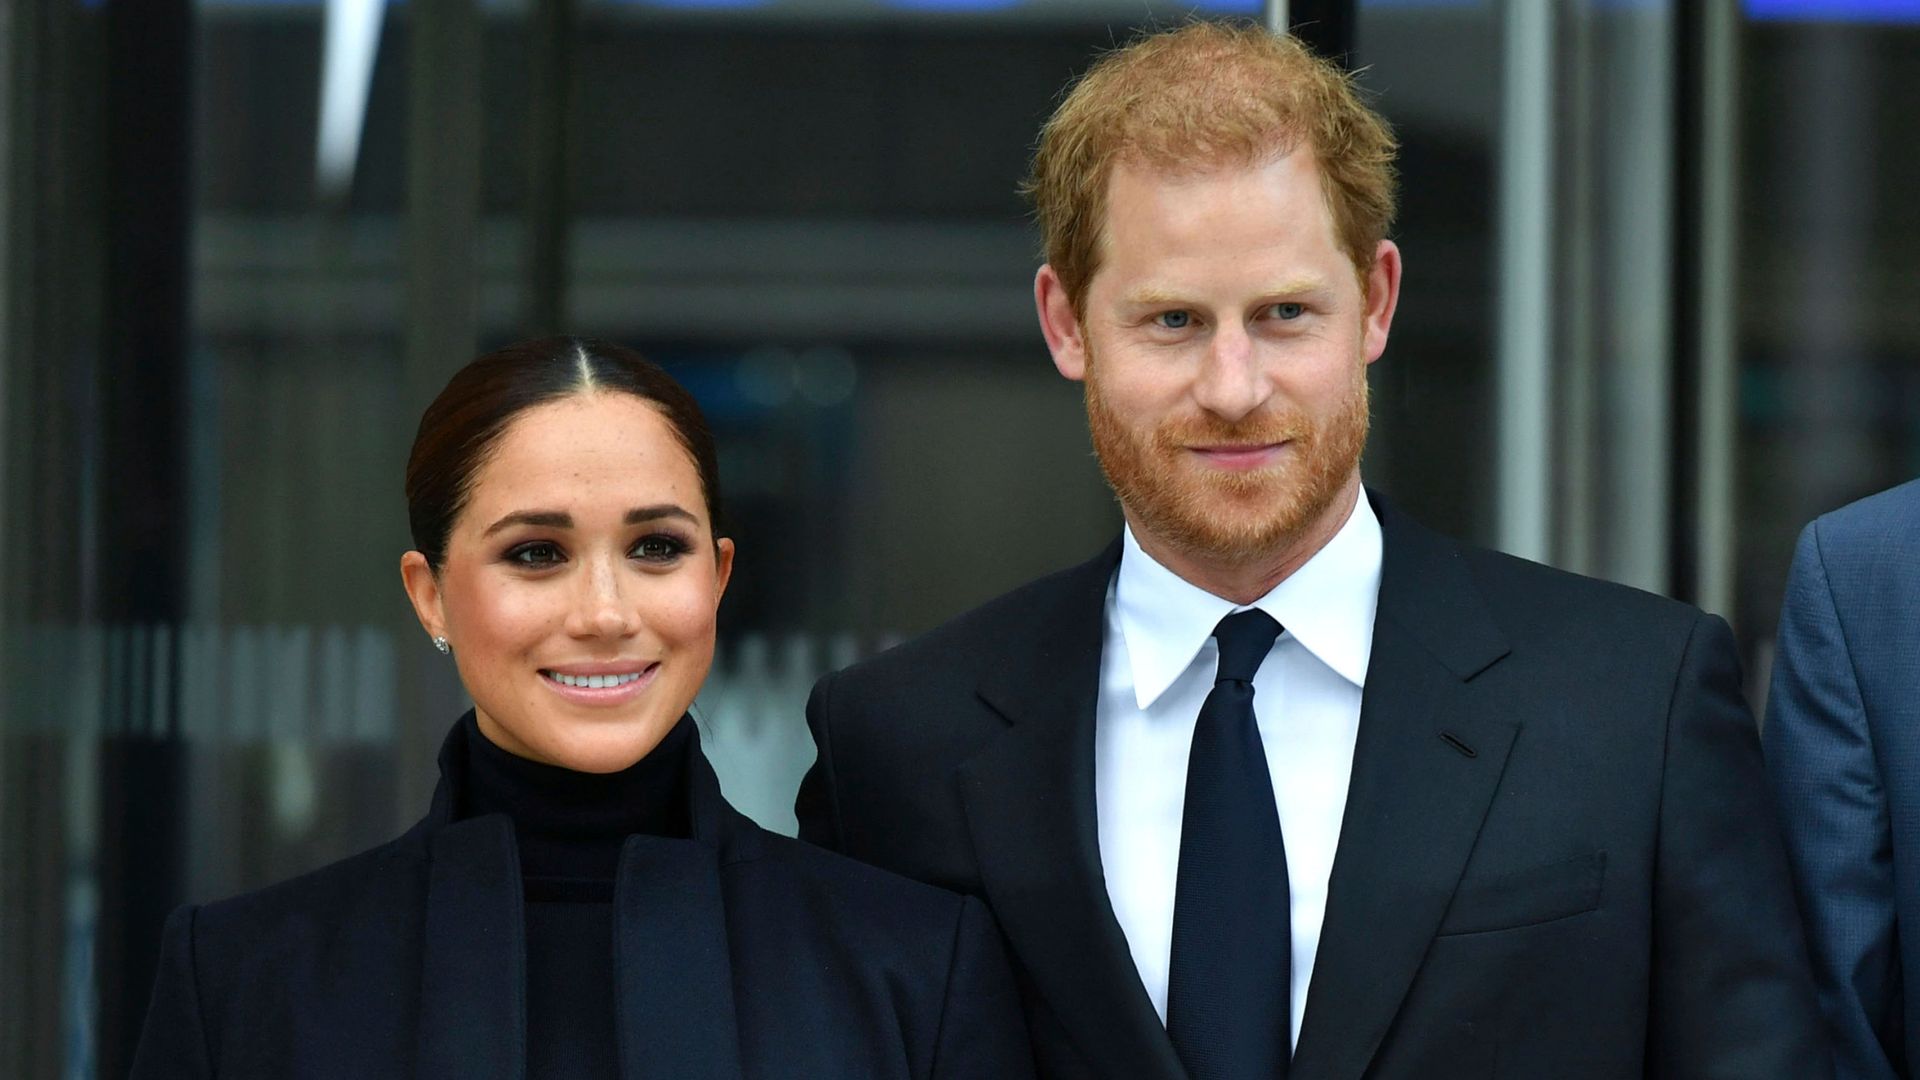 'Every parent needs to be a first responder': Harry and Meghan launch new project